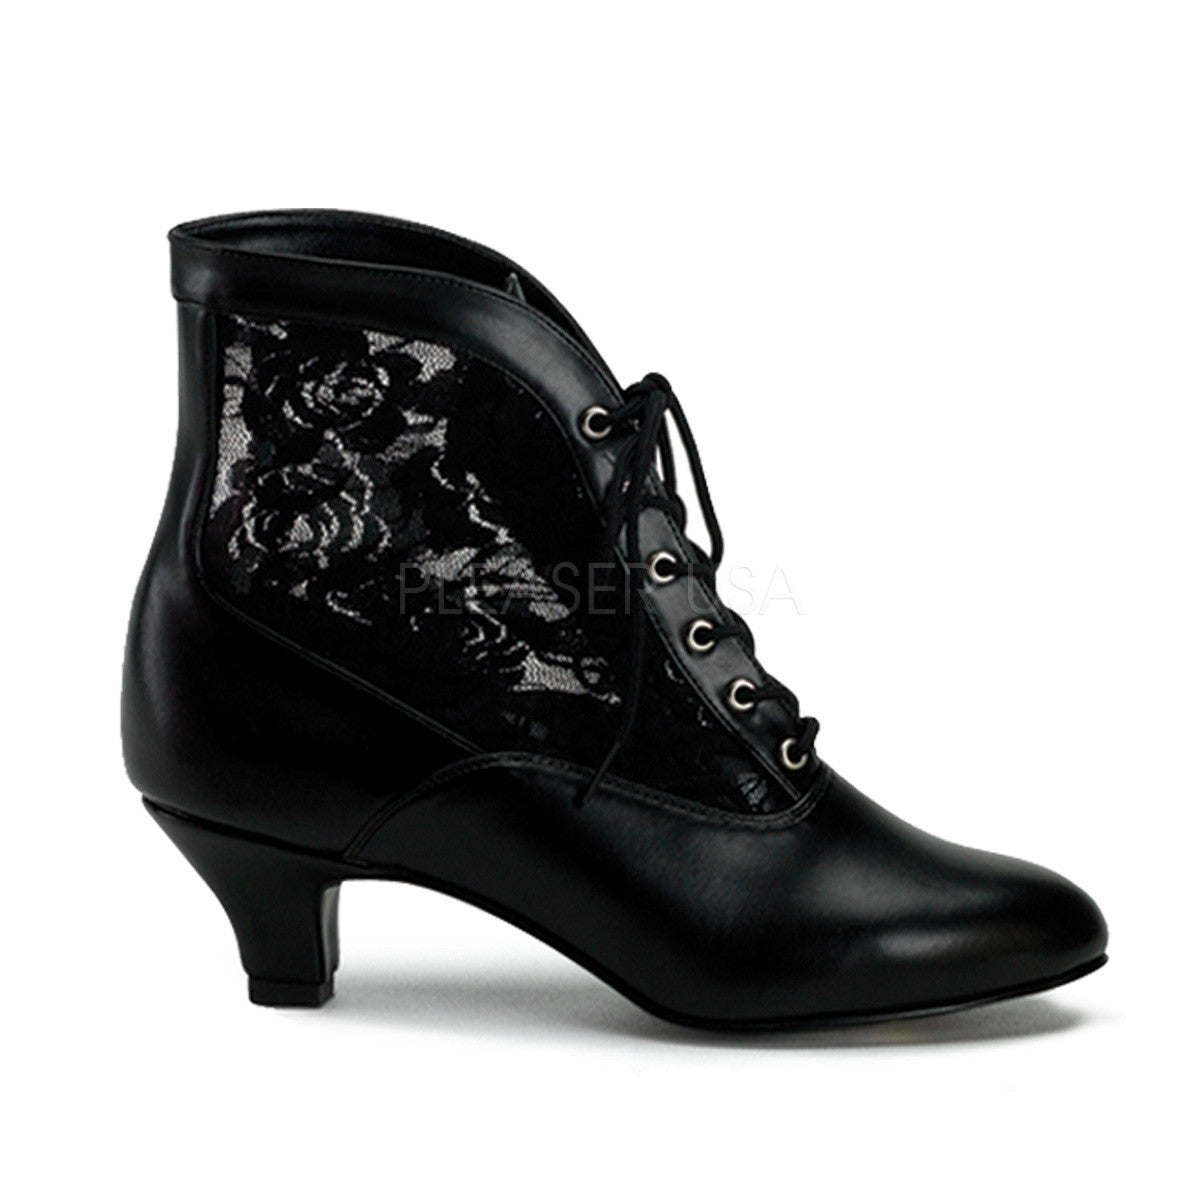 FUNTASMA DAME-05 Black Victorian Granny Boots With Lace Accent - Shoecup.com - 1